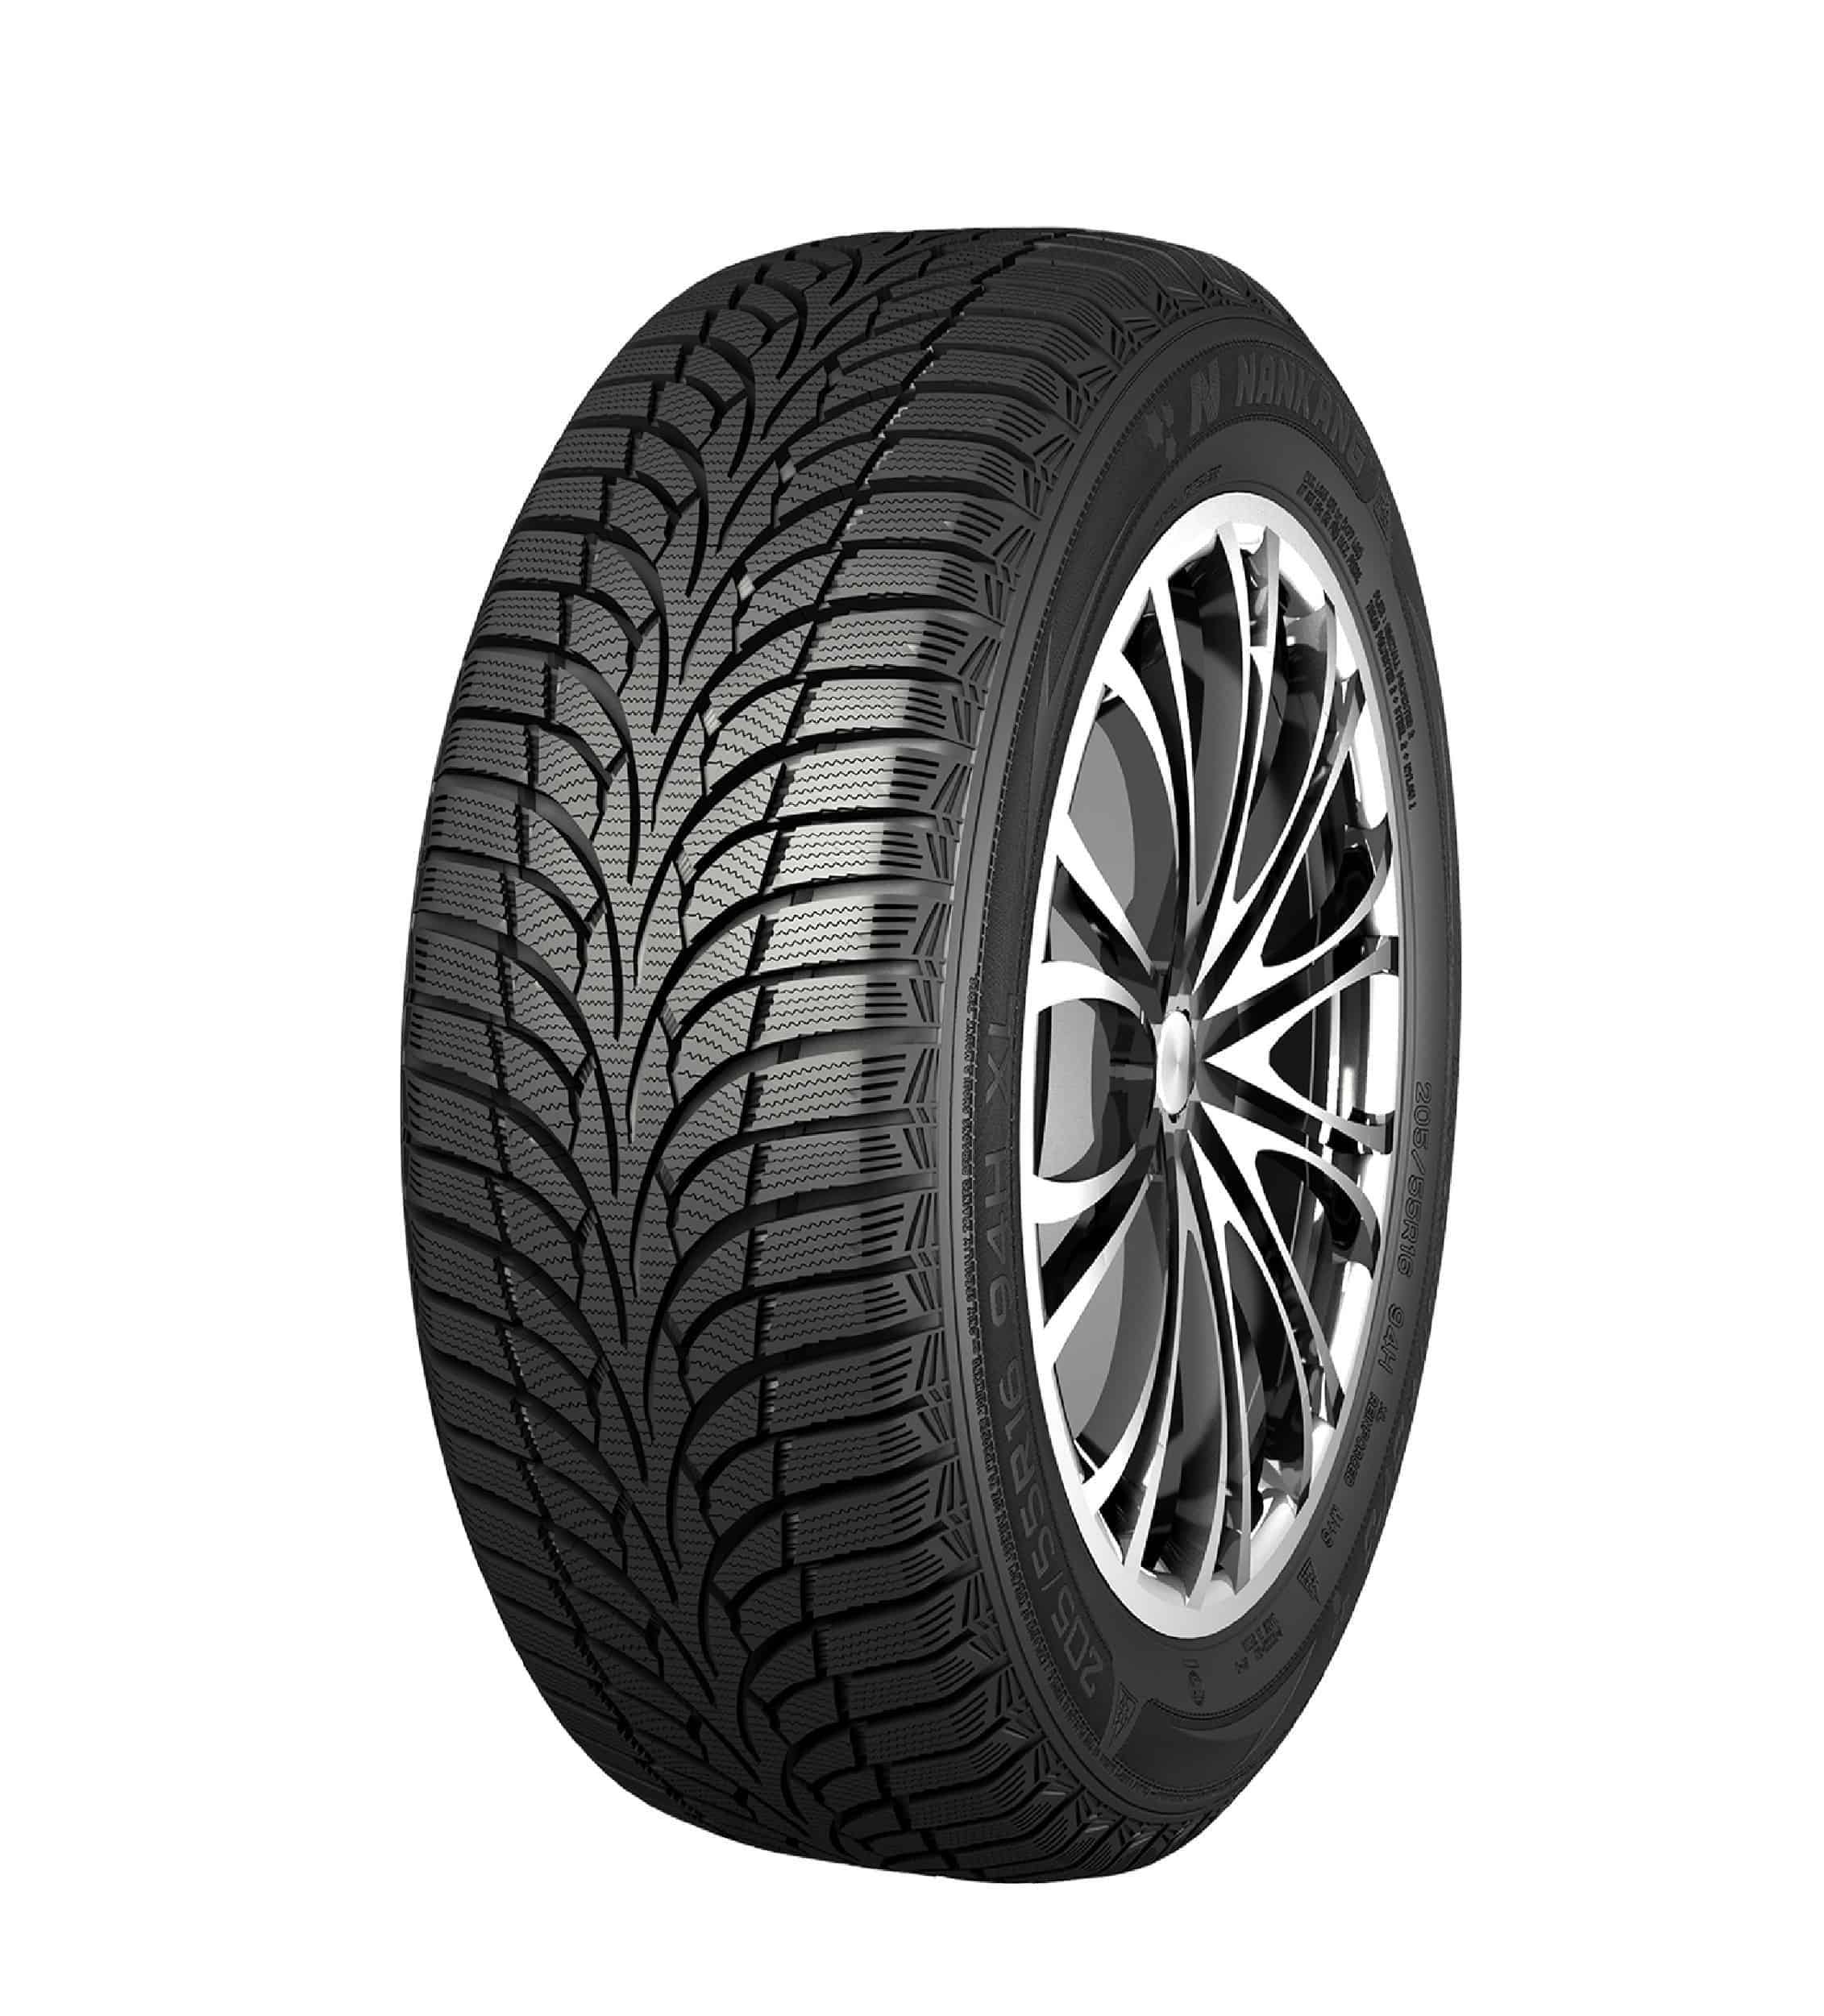 Gomme Nuove Nankang 215/45 R16 90H Winter Activa SV-3 XL M+S pneumatici nuovi Invernale